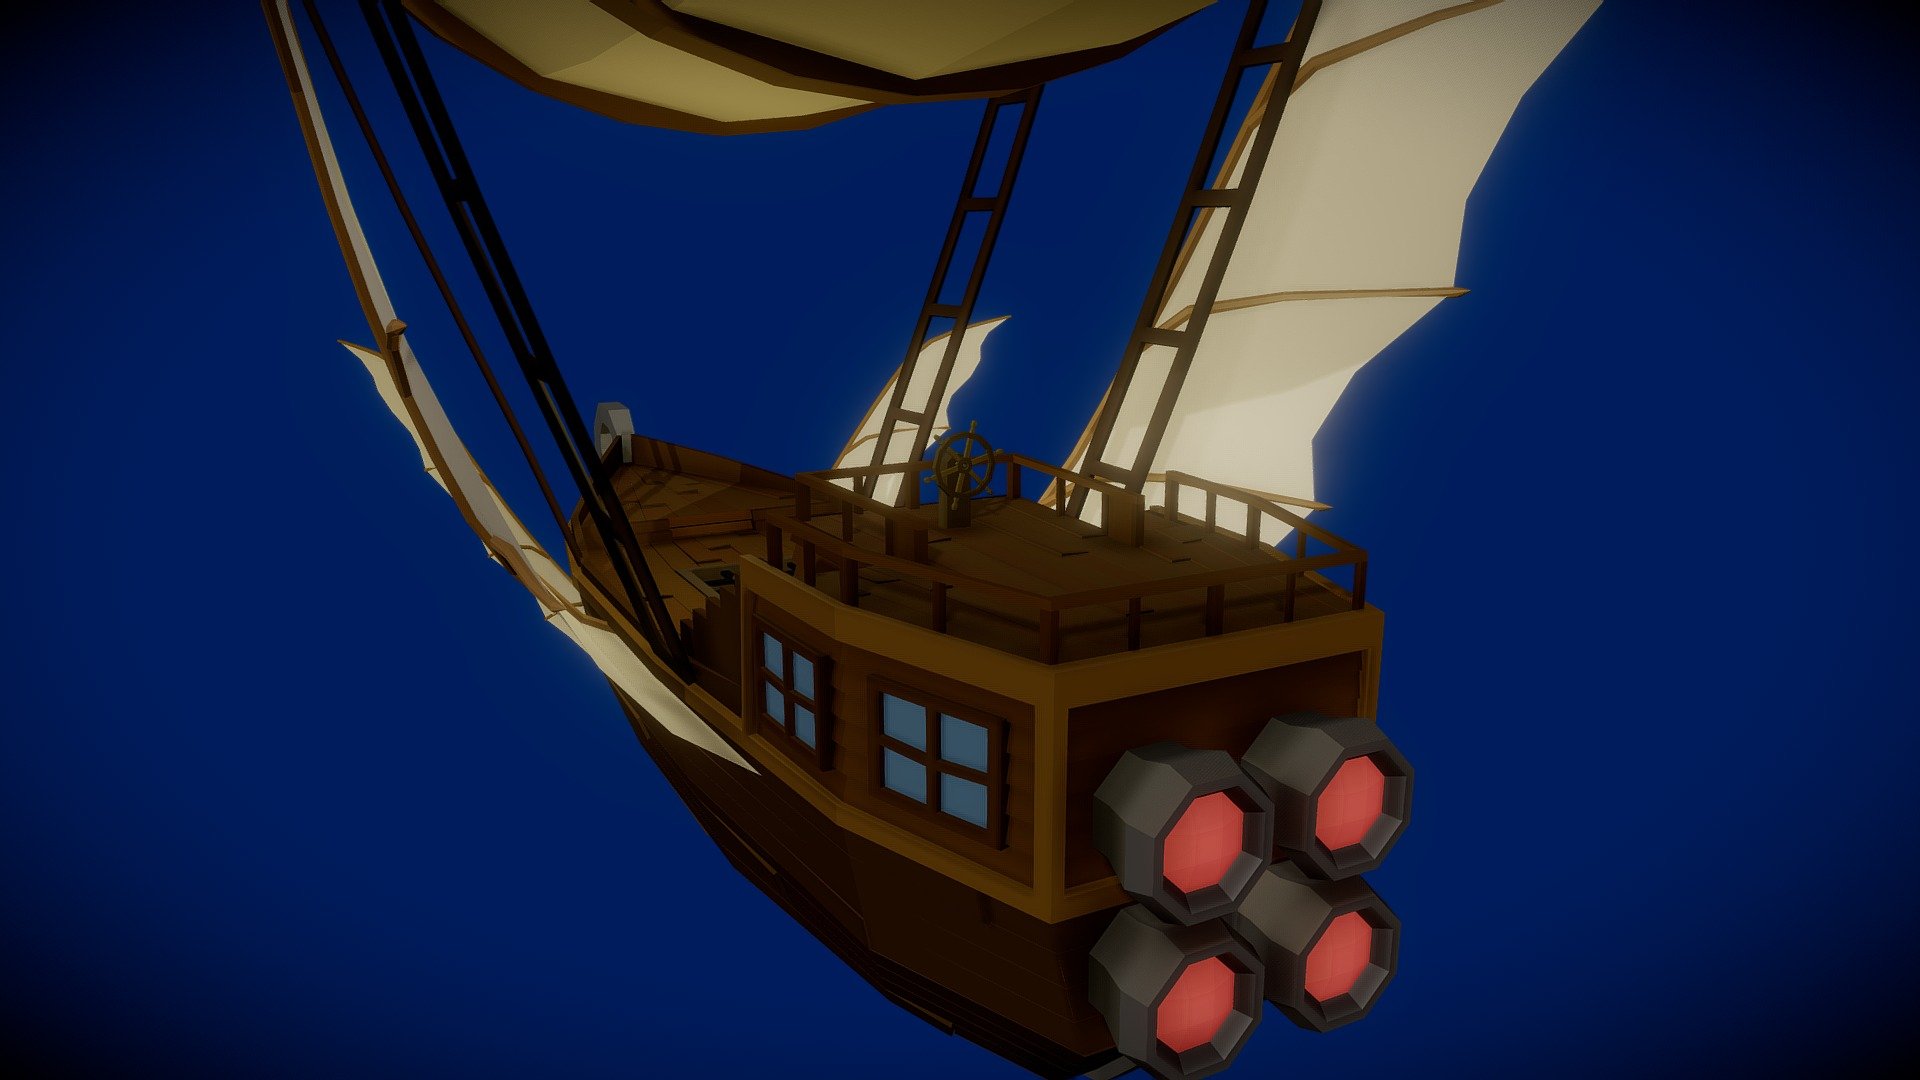 Yo, thanks for lookin'!

Just thought I'd share this lowpoly flying ship I made, since I think it turned out kinda cool looking!  And could maybe help someone else jumpstart their project or something.. 

It was made for my (Vividly) Low Poly Project &lsquo;Fungal Park' for the Low Poly Fantasy Island competiton in Janurary &lsquo;21.
Link here: (https://sketchfab.com/3d-models/fungal-park-c88f1dfc18fe45e999a2240ab5f2d3c8)

P.S. If you do end up using it in something cool, I'd love to see it! Cheers, and enjoy! - Lowpoly Flying Ship - Download Free 3D model by Wordofcurse 3d model